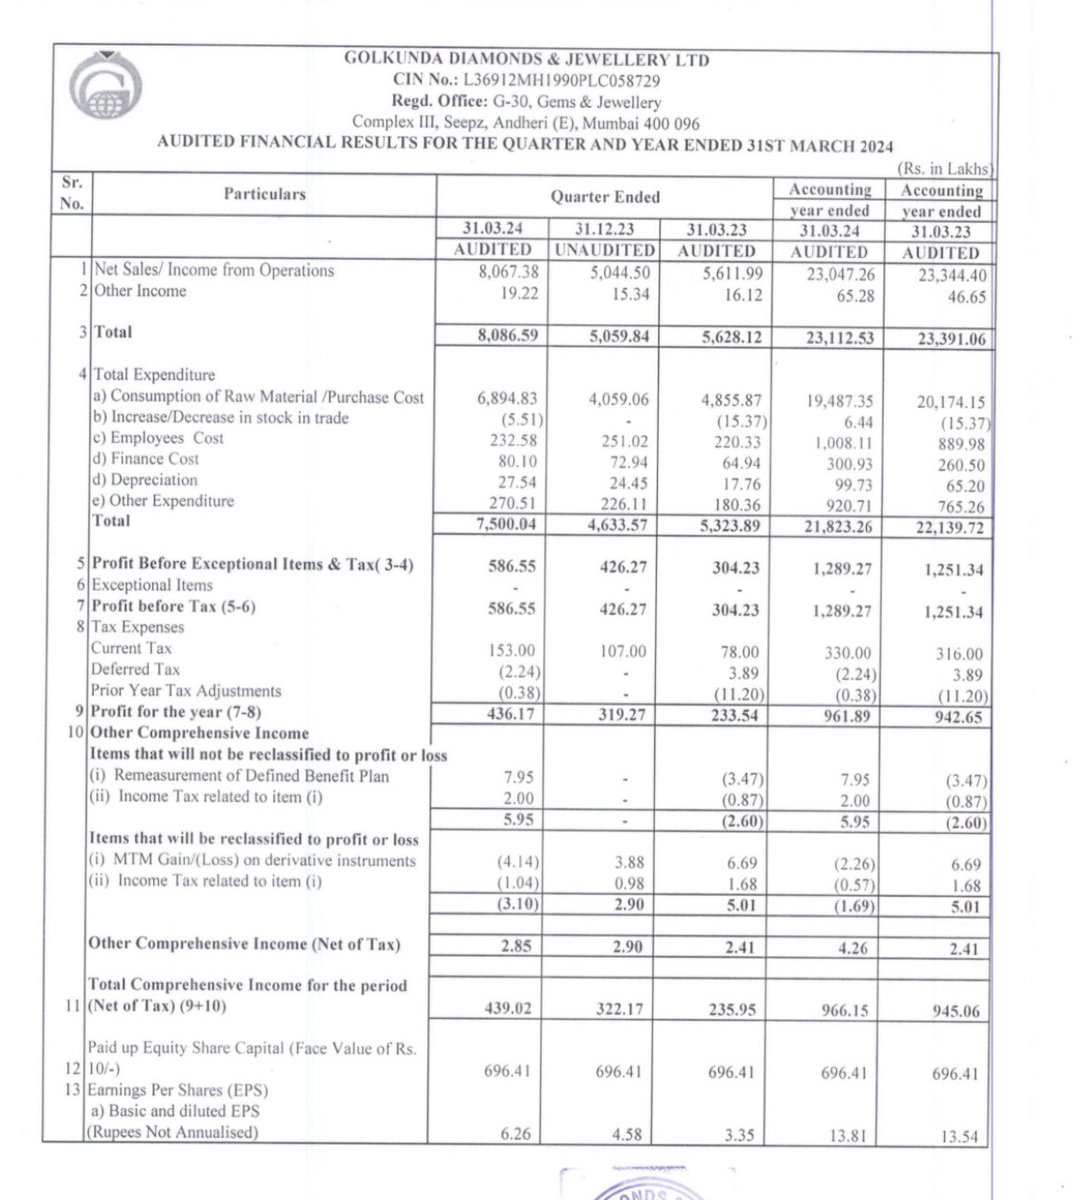 BLOCKBUSTER & ABSOLUTELY STRONG Q4FY24 RESULT HAS BEEN REPORTED BY GOLKUNDA DIAMONDS & JEWELLERY 🔥🔥🔥 Q4FY24 Net Profit Of 4.36 CR VS Q3FY24 Net Profit Of 3.19 CR VS Q4FY23 Net Profit Of 2.34 CR Net profit growth of 37% QOQ & 86% YOY Valuation wise stock is very